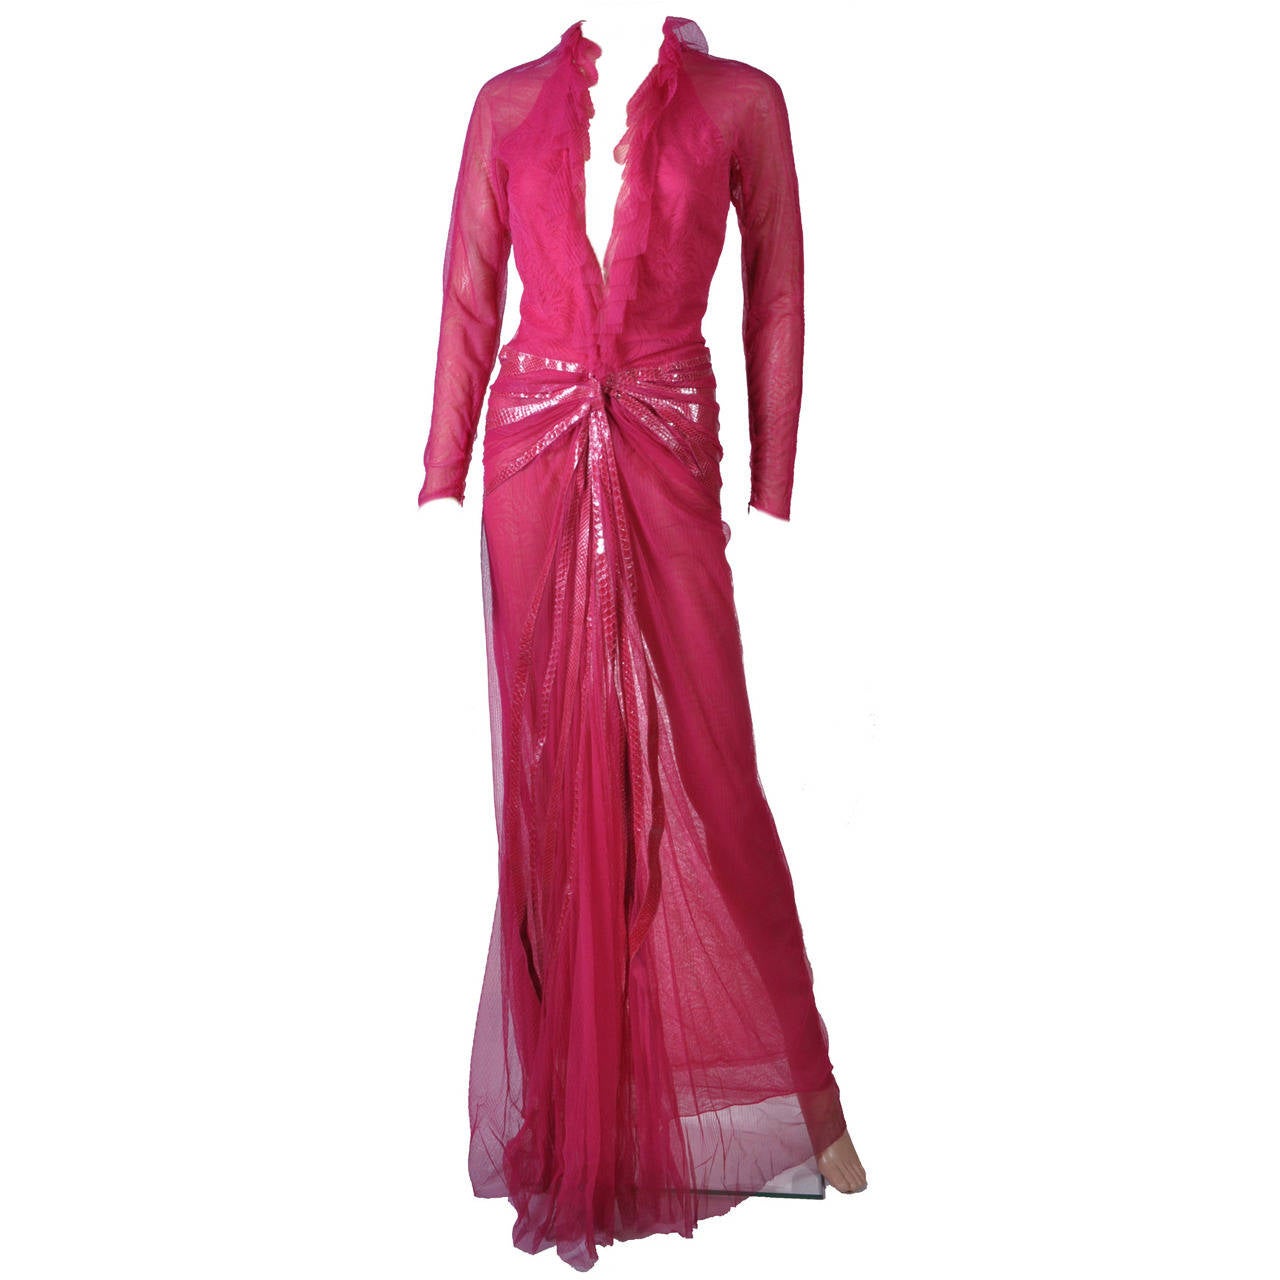 NEW and HIGHLY COLLECTIBLE VERSACE PINK LACE AND SNAKESKIN GOWN